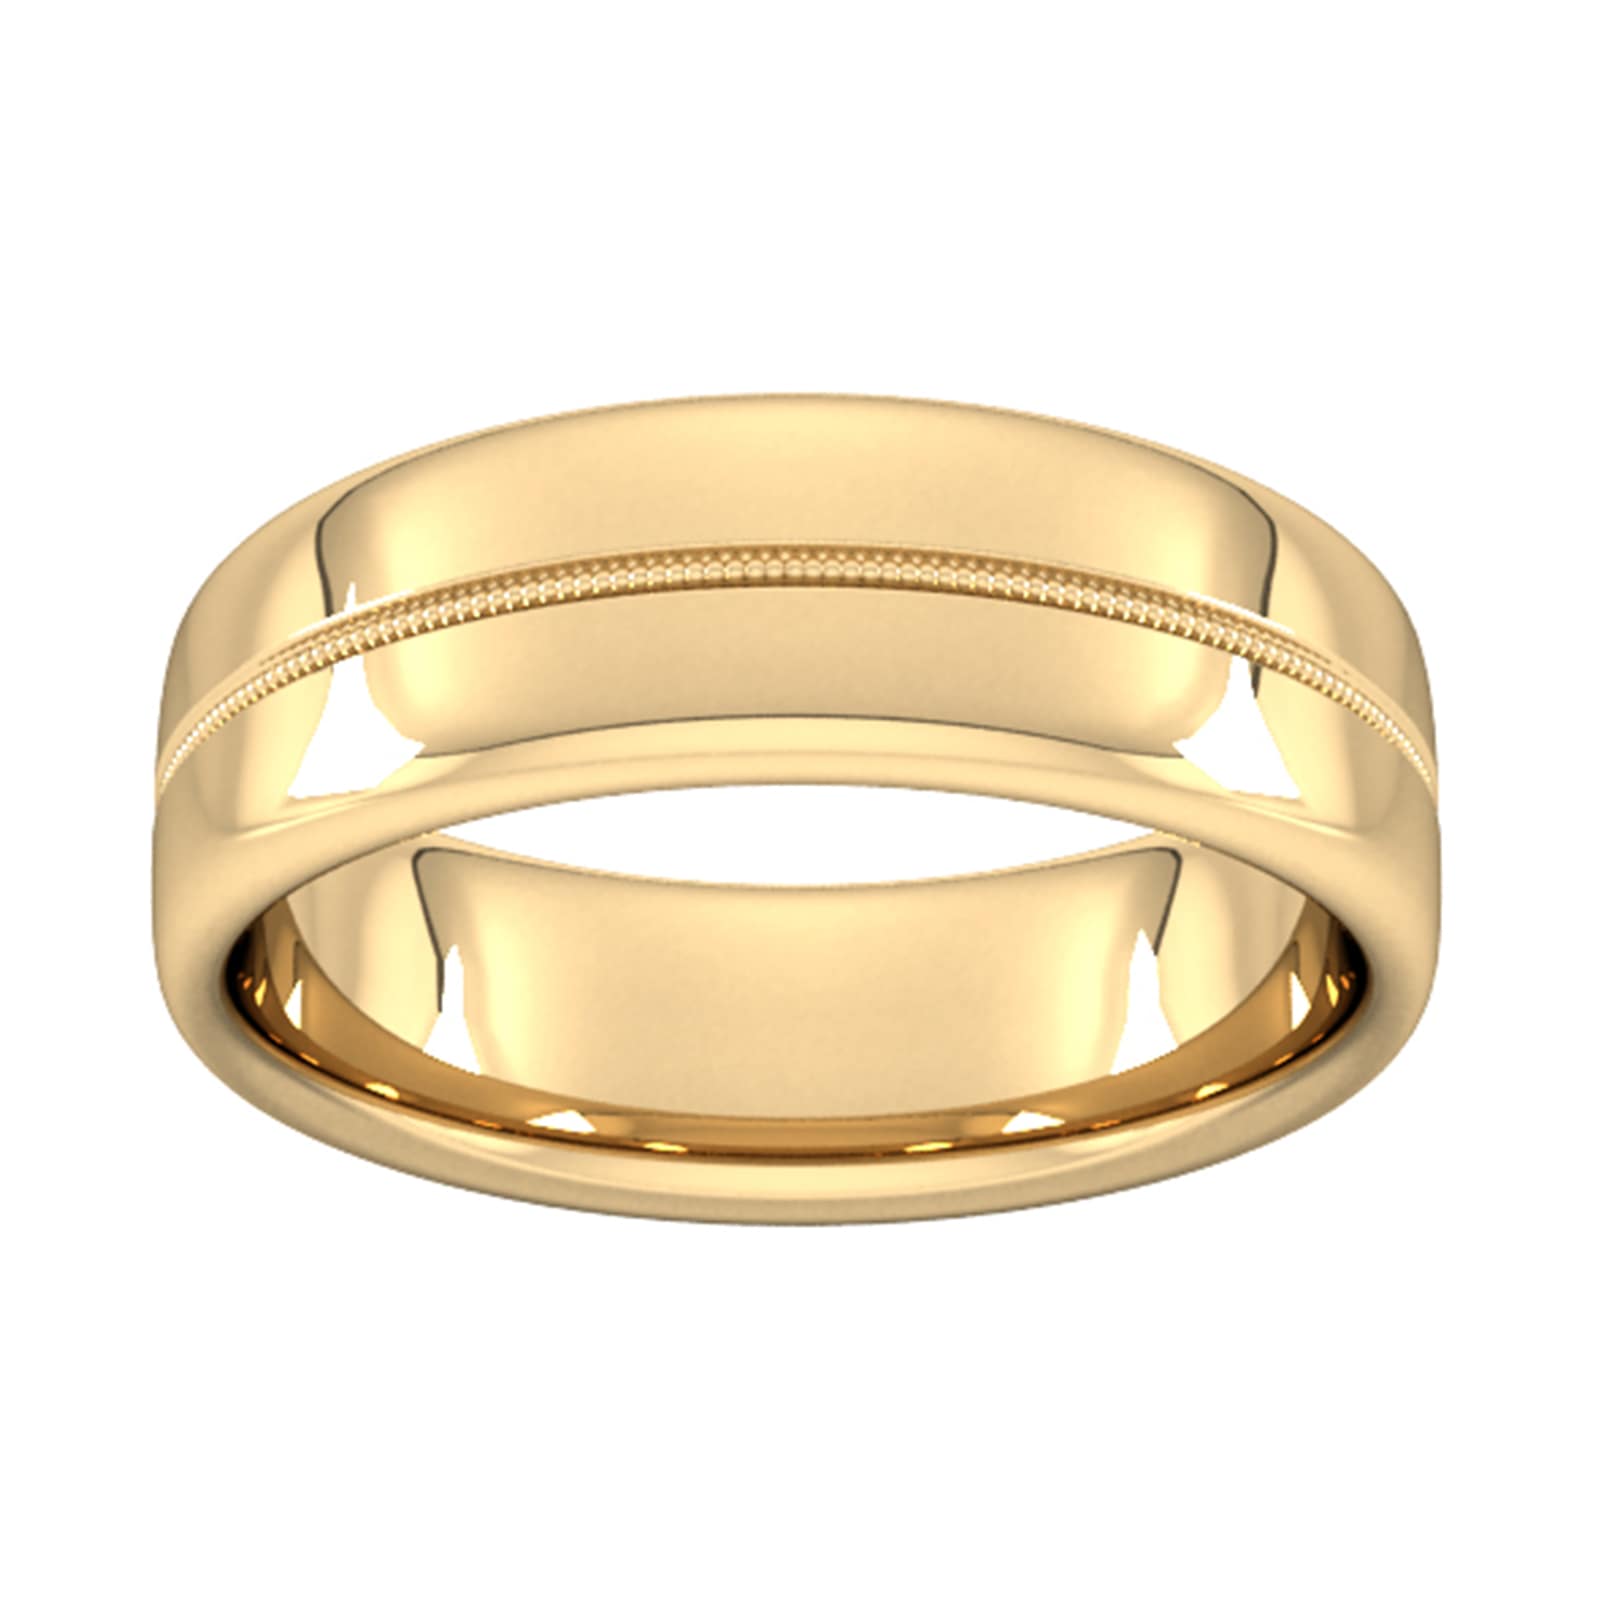 7mm Traditional Court Standard Milgrain Centre Wedding Ring In 18 Carat Yellow Gold - Ring Size P